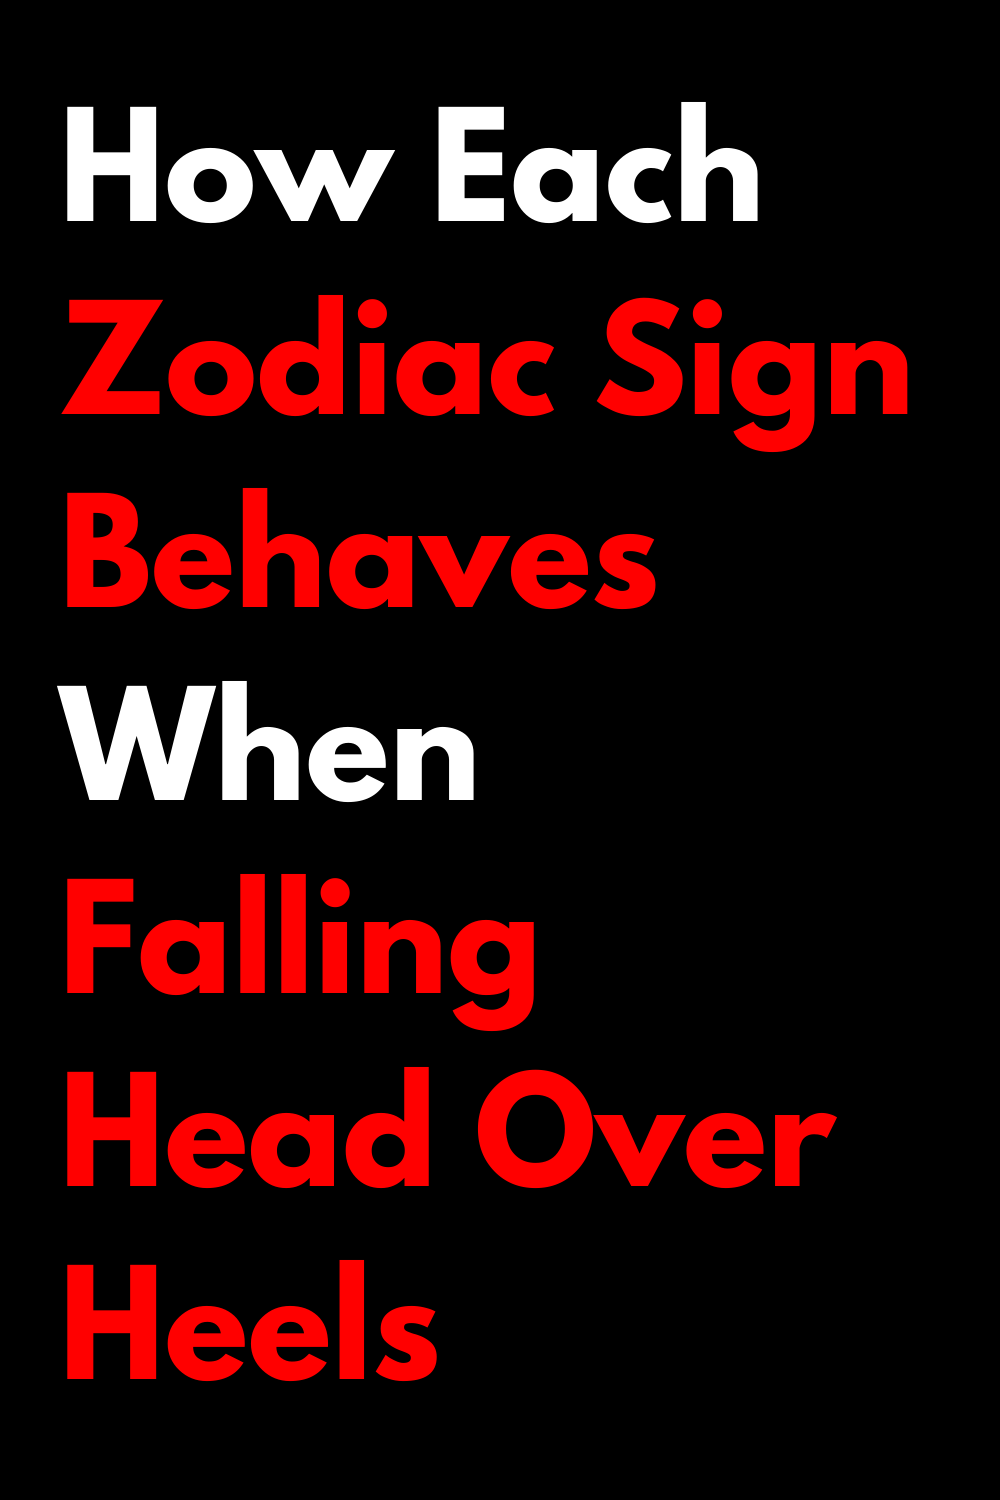 How Each Zodiac Sign Behaves When Falling Head Over Heels